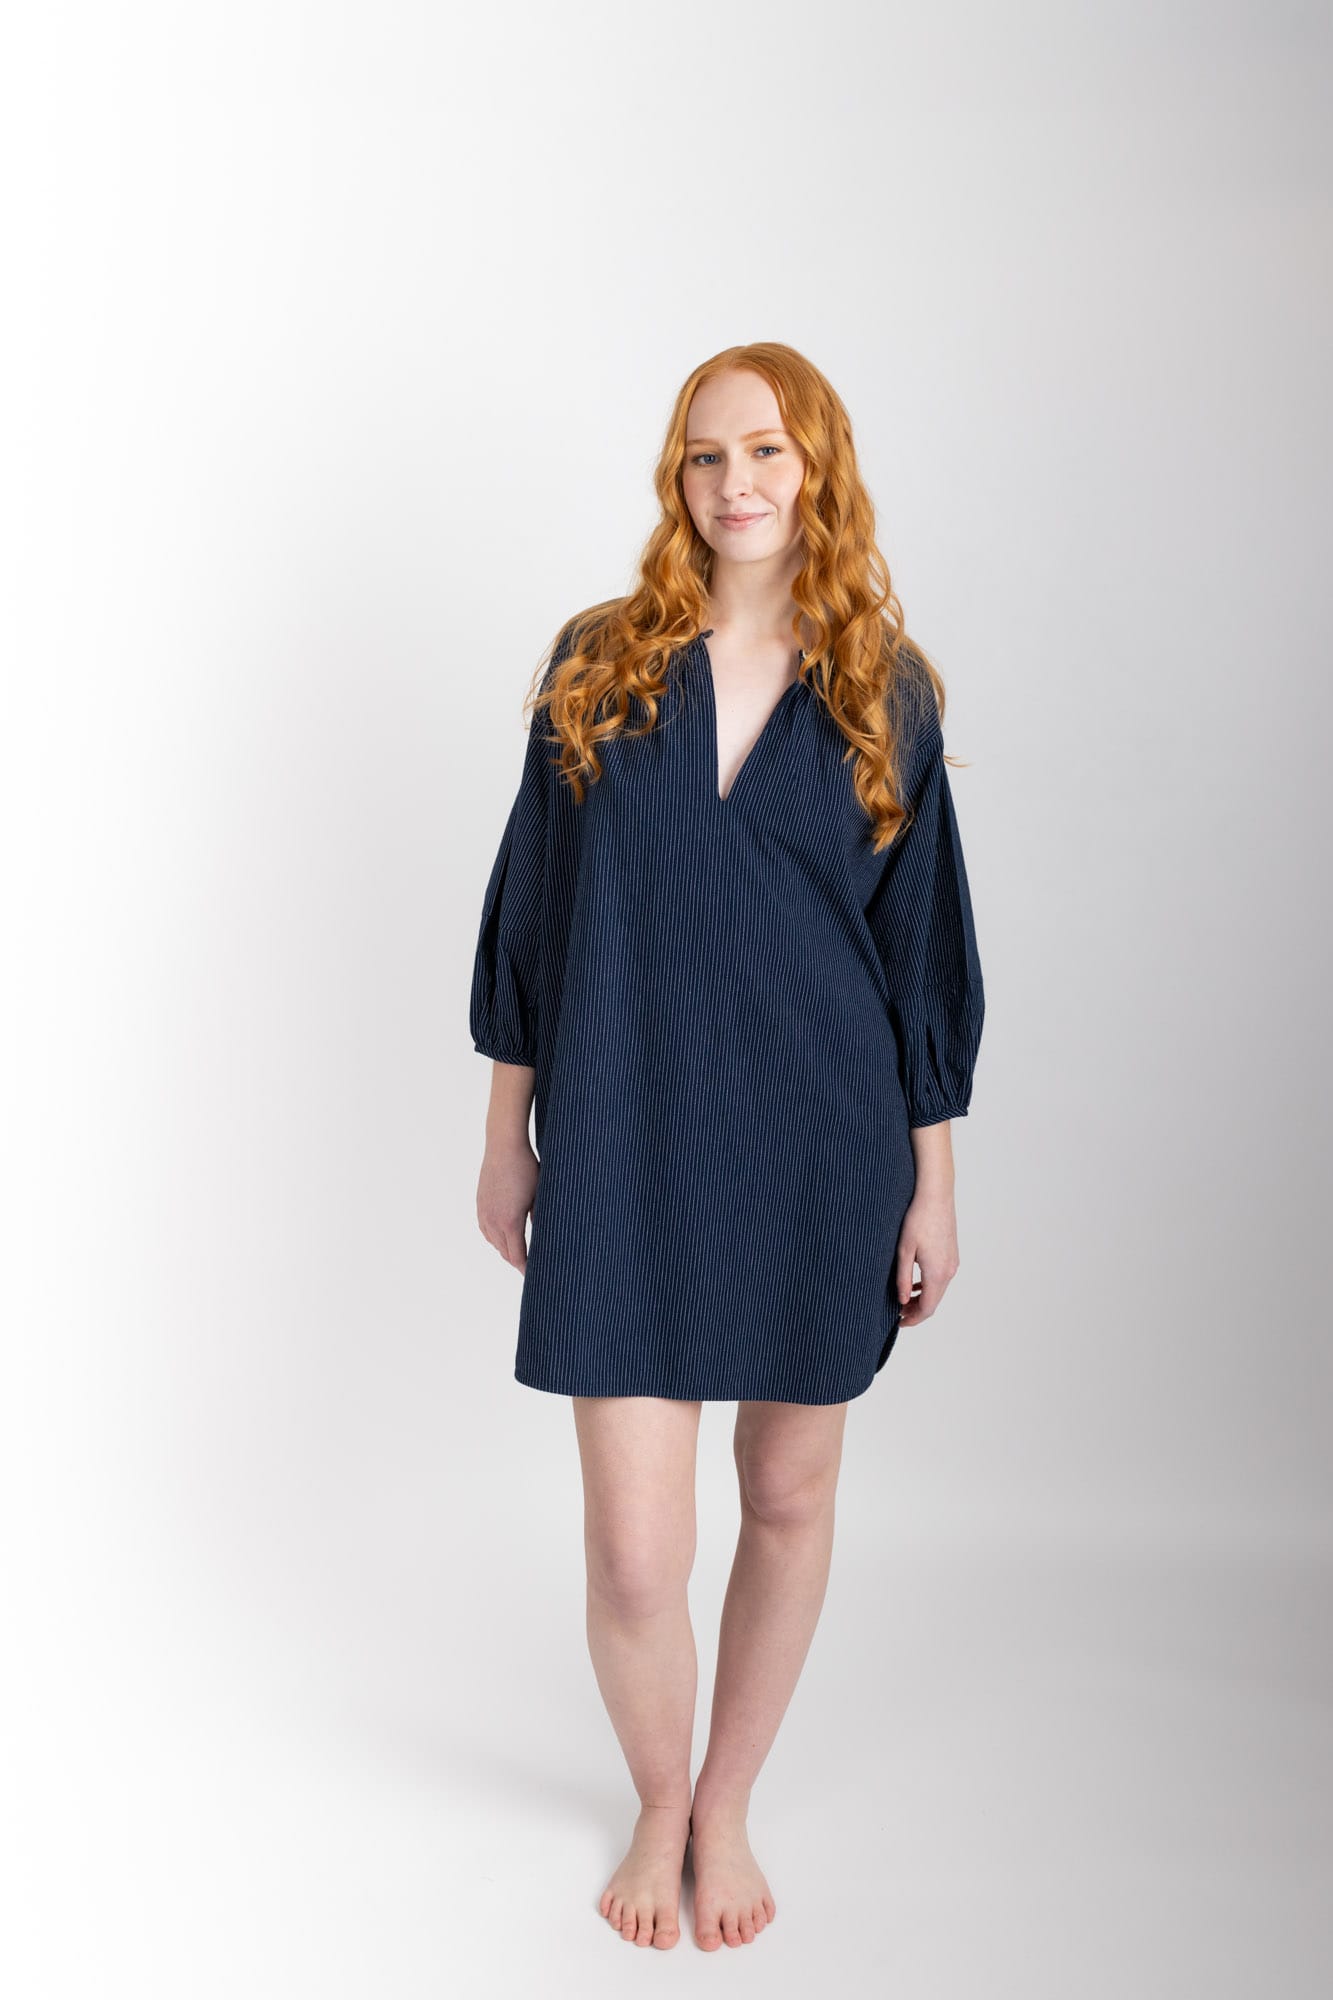 This knee length women’s nightdress dress has a relaxed fit with gathered sleeves ,and a single loop buttoned neckline which opens to a V-neck. In navy pinstripe and made from 100% organic cotton, it features deep pockets, and is finished with French seams.